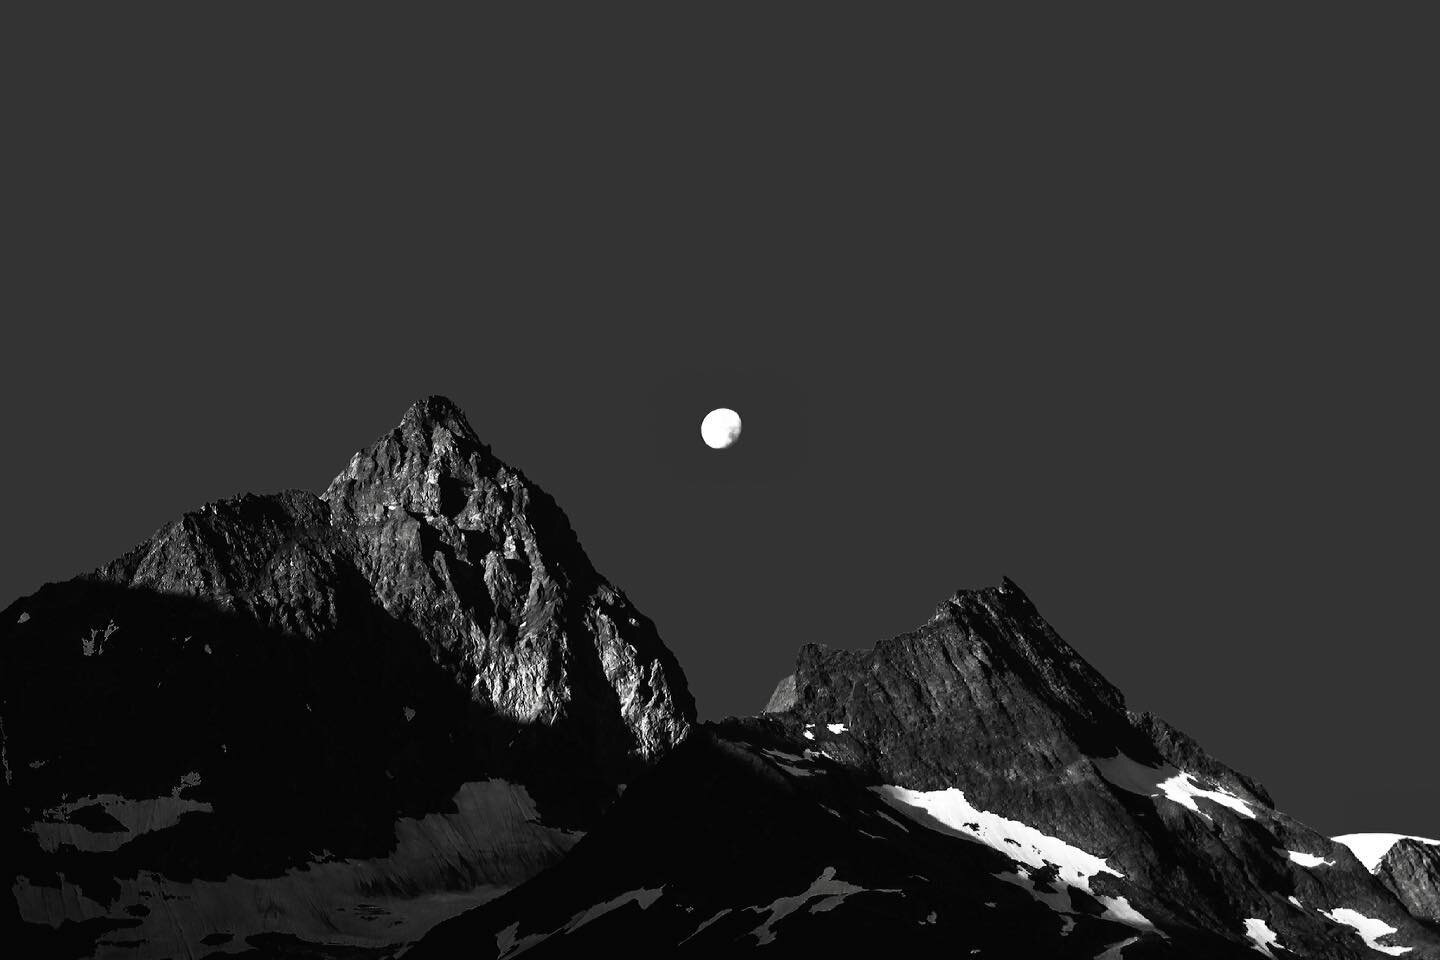 Hey moon 
&bull;
I&rsquo;ve been working on this image for like 2 years now and I think I&rsquo;m finally happy with it. 
&bull;
&bull;
&bull;
&bull;
#sustenpass #myswitzerland #bwphotography #bwlandscape #landscapephotography #sunrise #moon #moonset